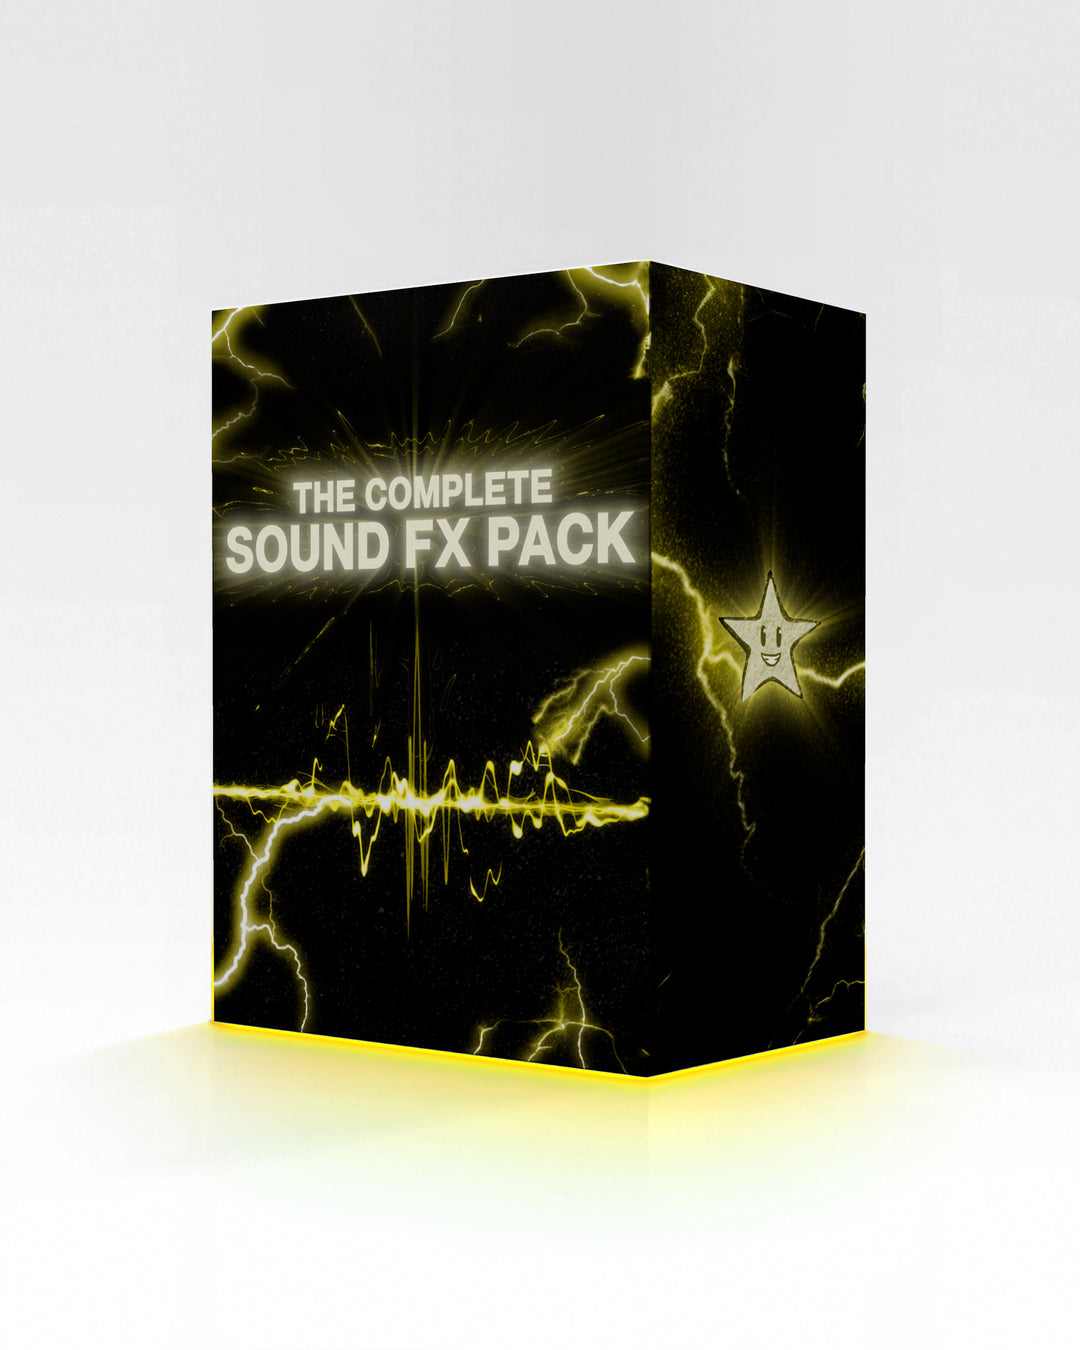 The Complete Sound FX Pack